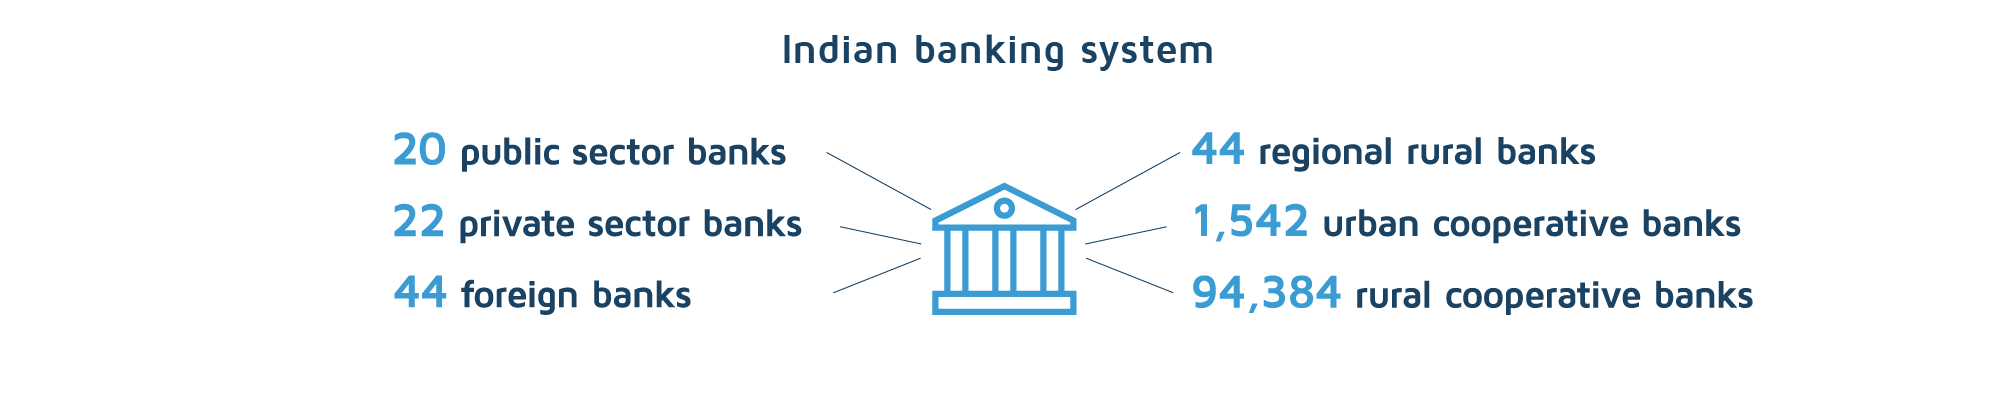 Top 10 Largest Public and Private Banks in India